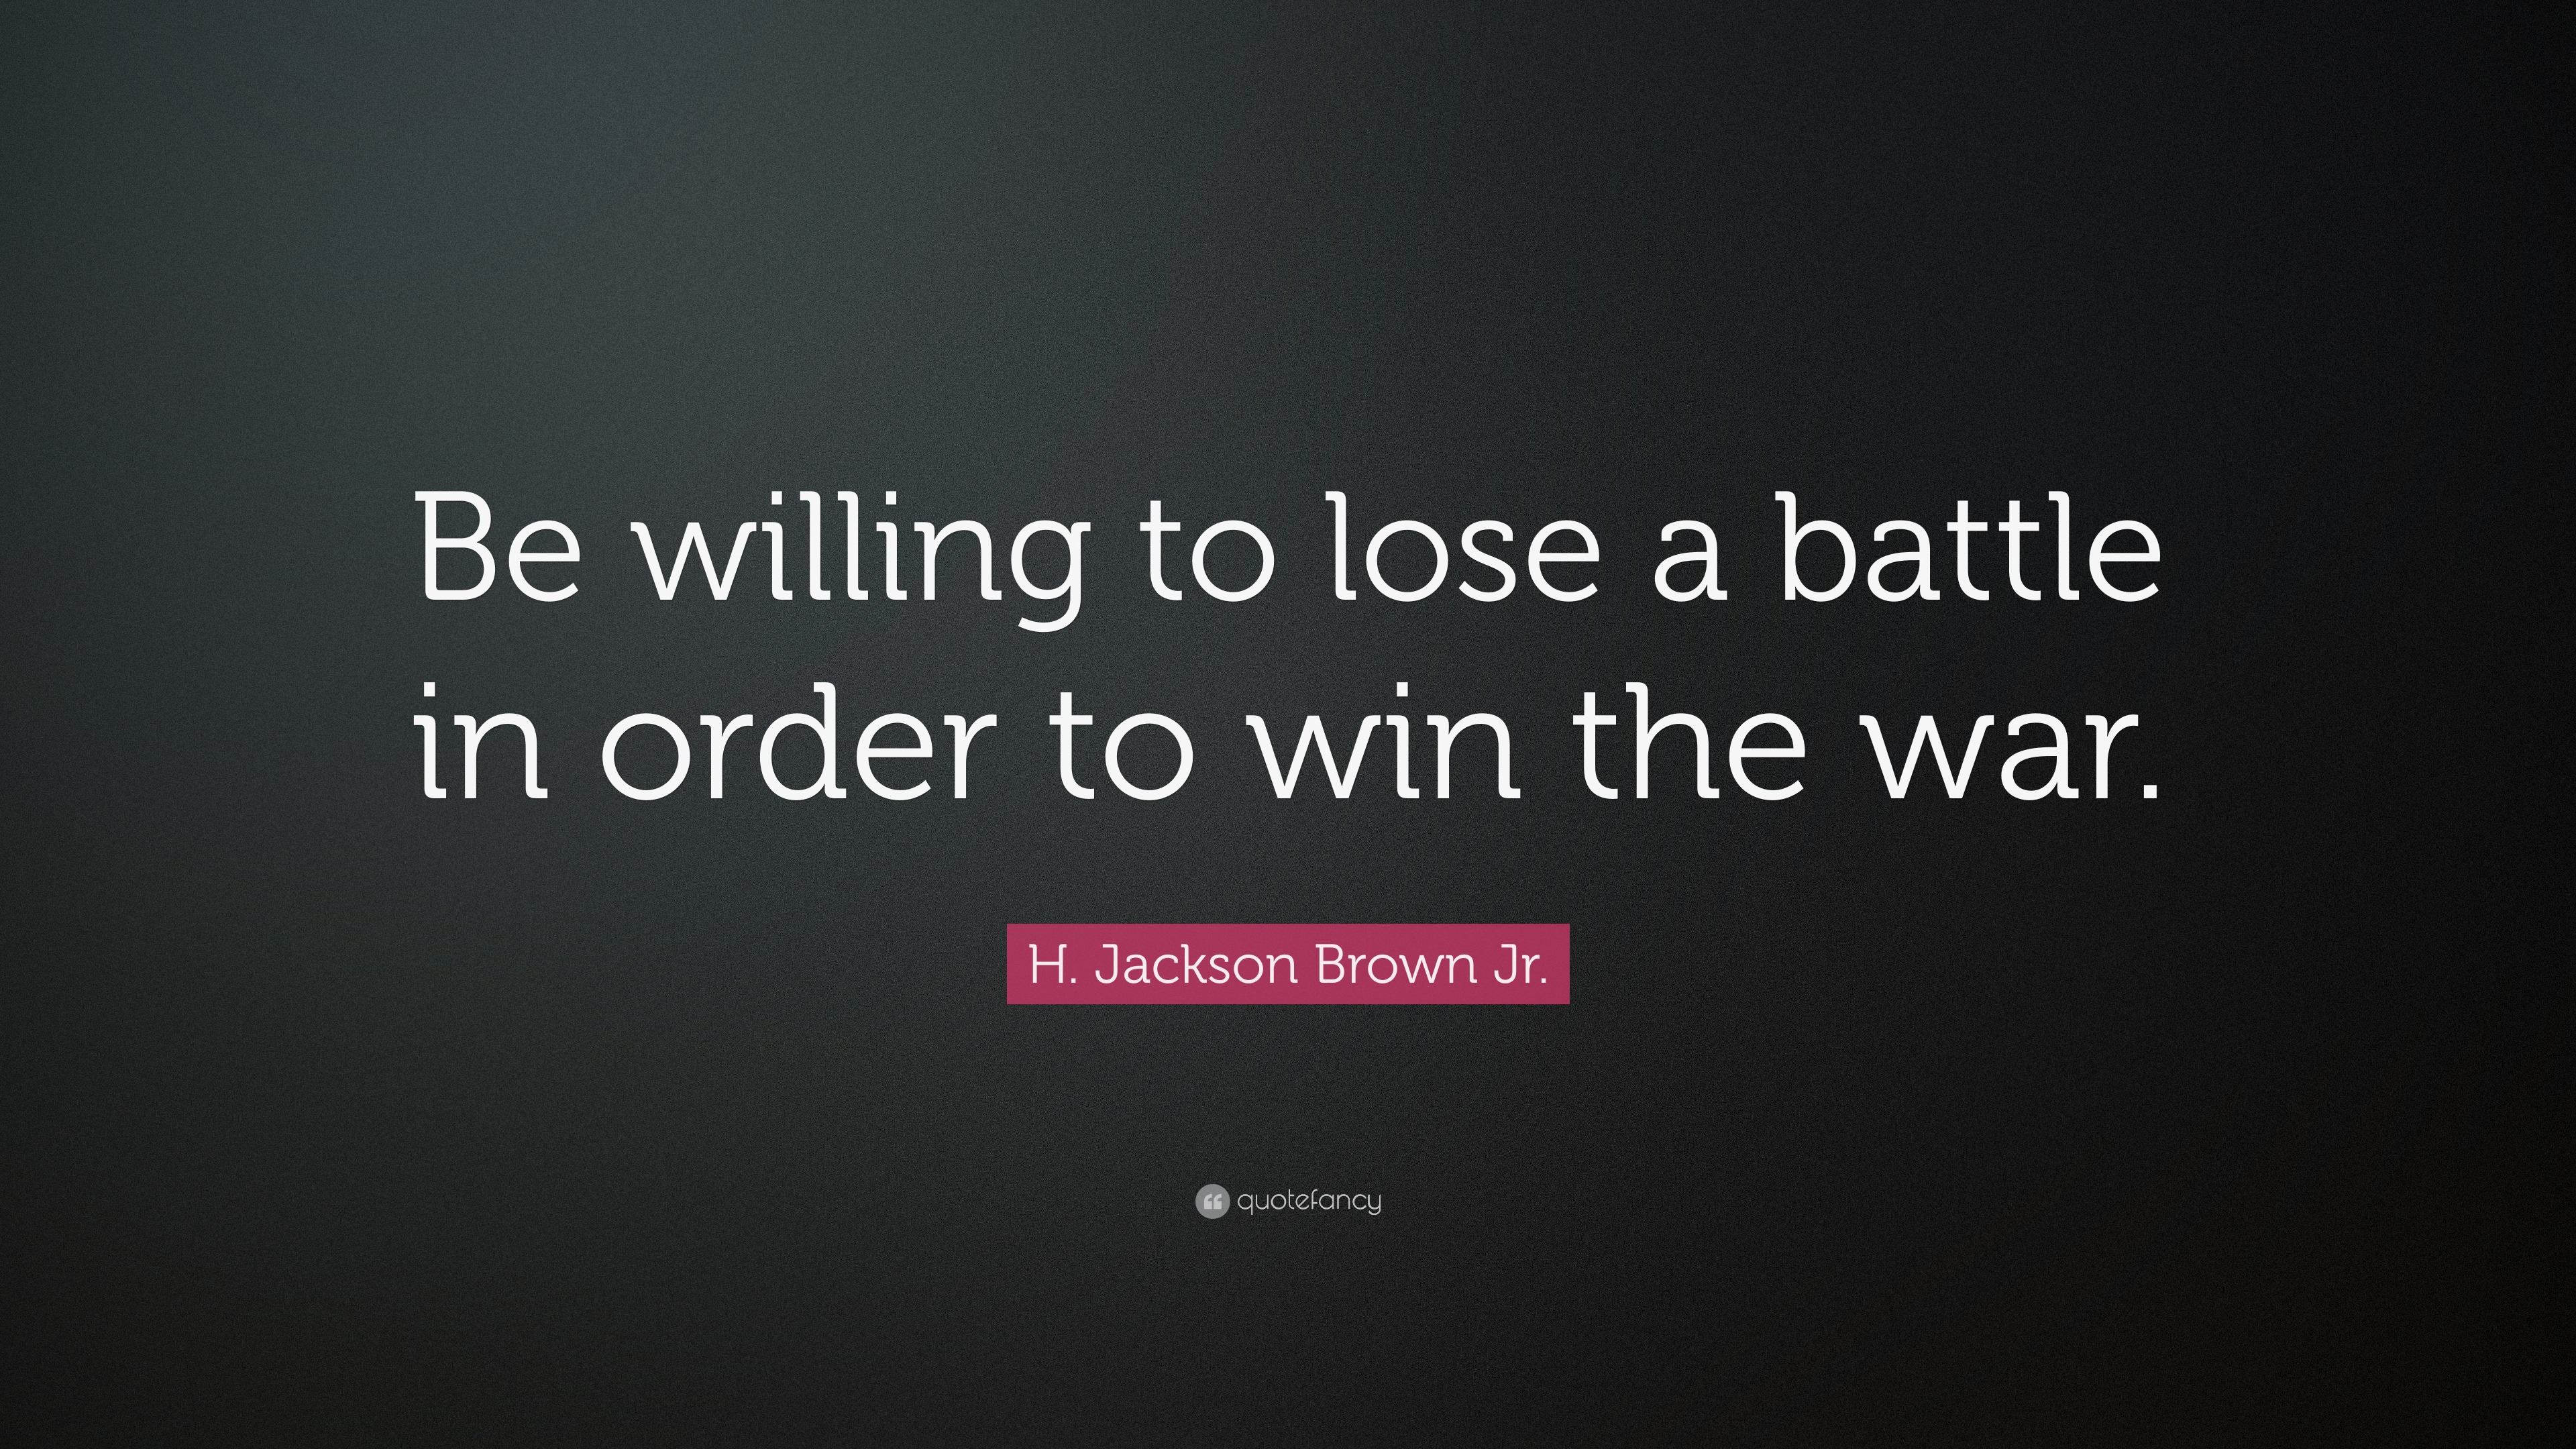 H. Jackson Brown Jr. Quote: "Be willing to lose a battle in order to win the war." (12 ...